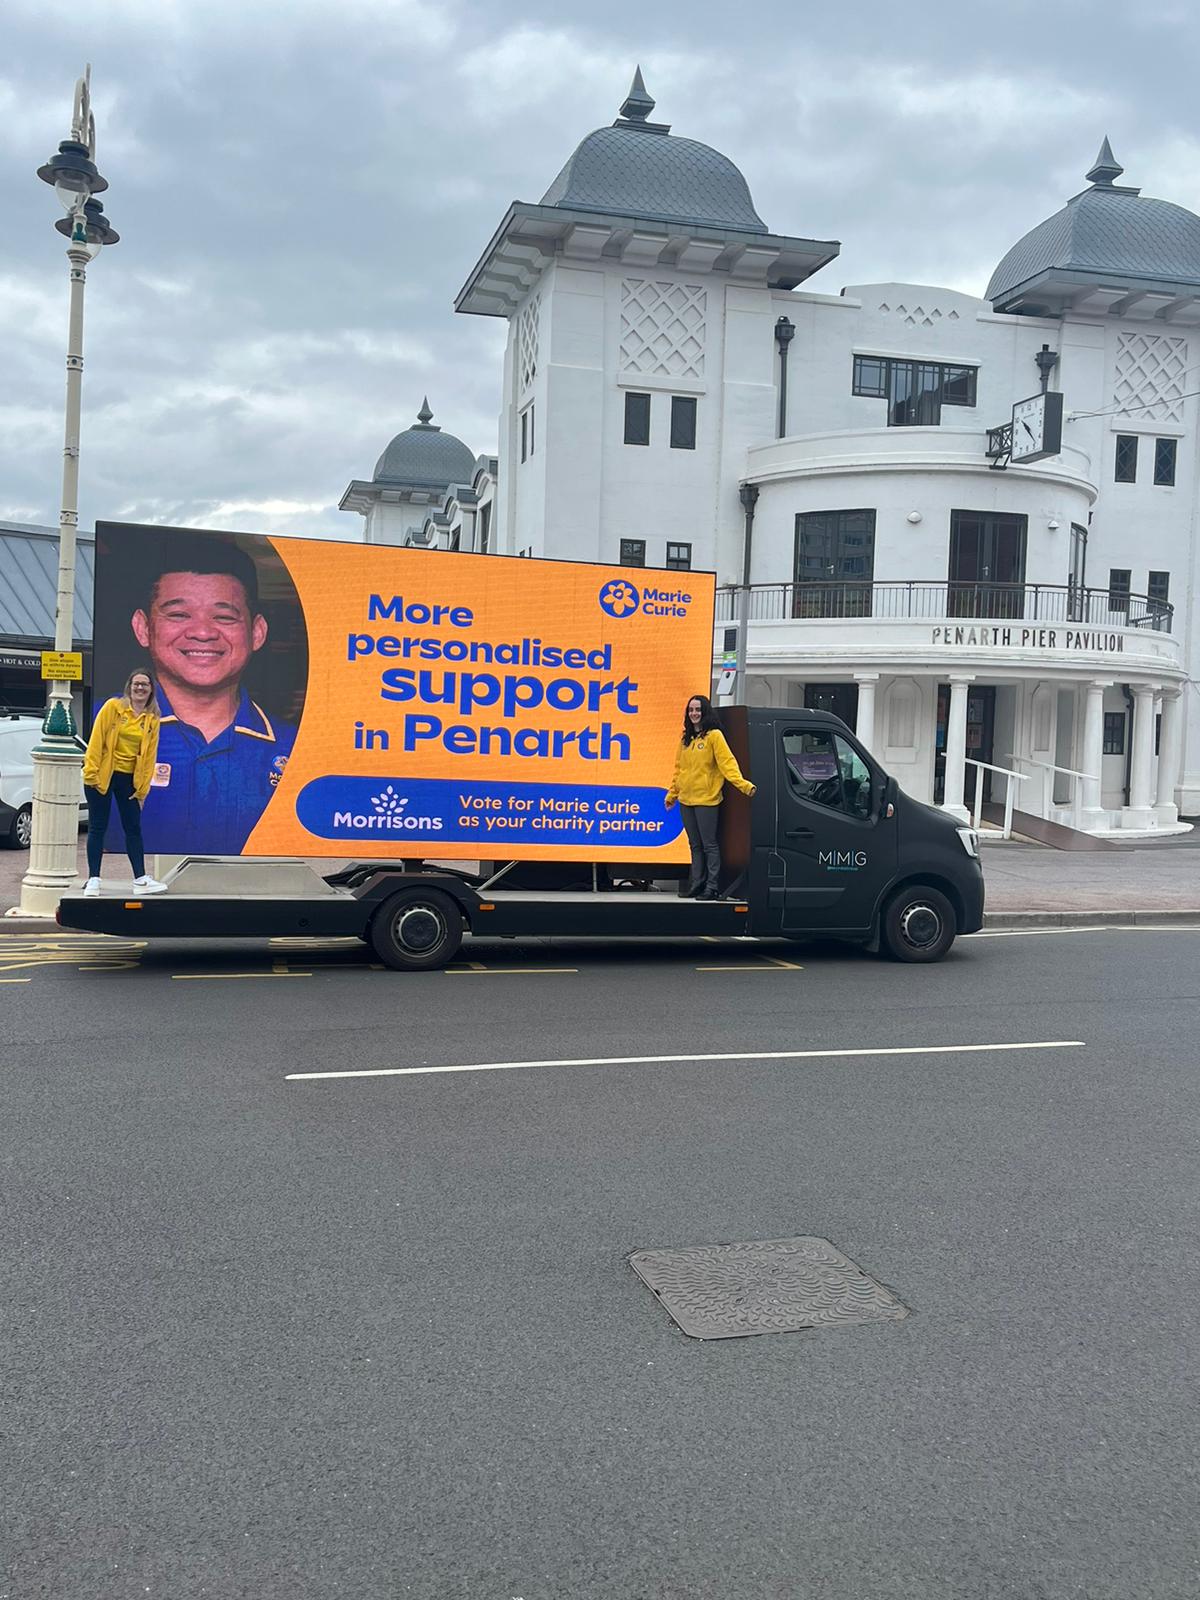 Claire Phillips and Katy Jackson of Marie Curie at Penarth Pier Pavilion 